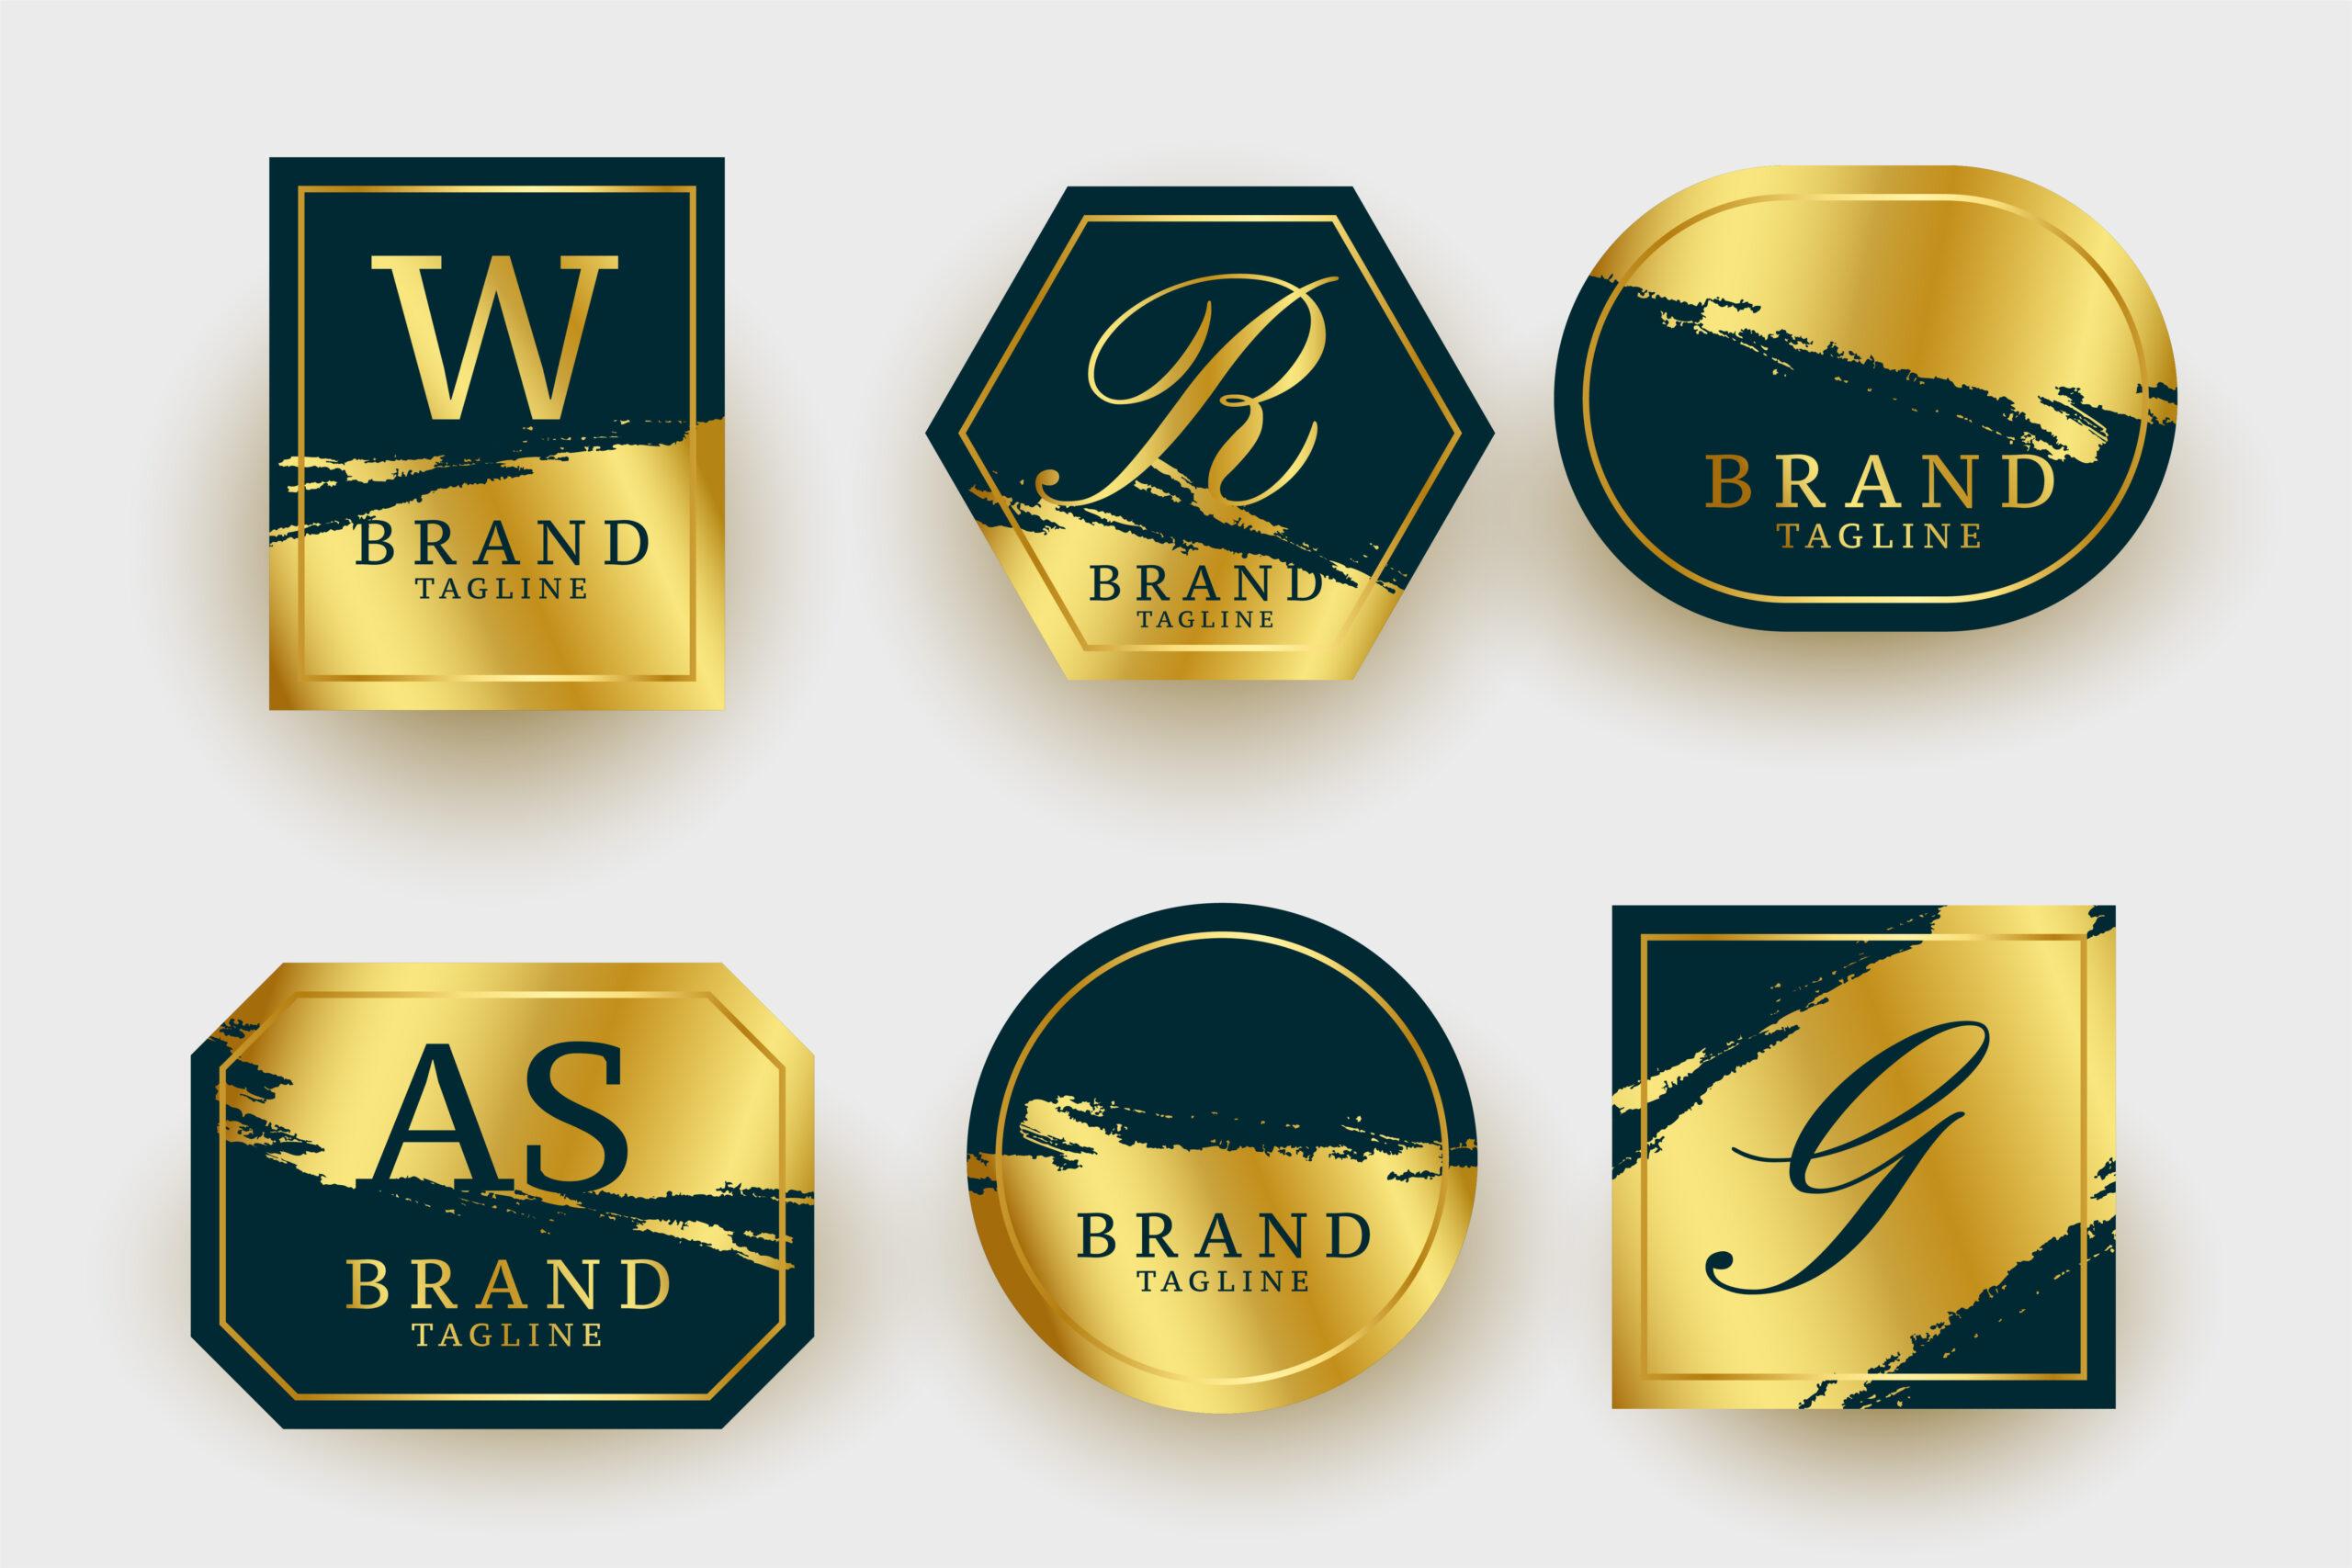 Creating a premium brand that your customers love